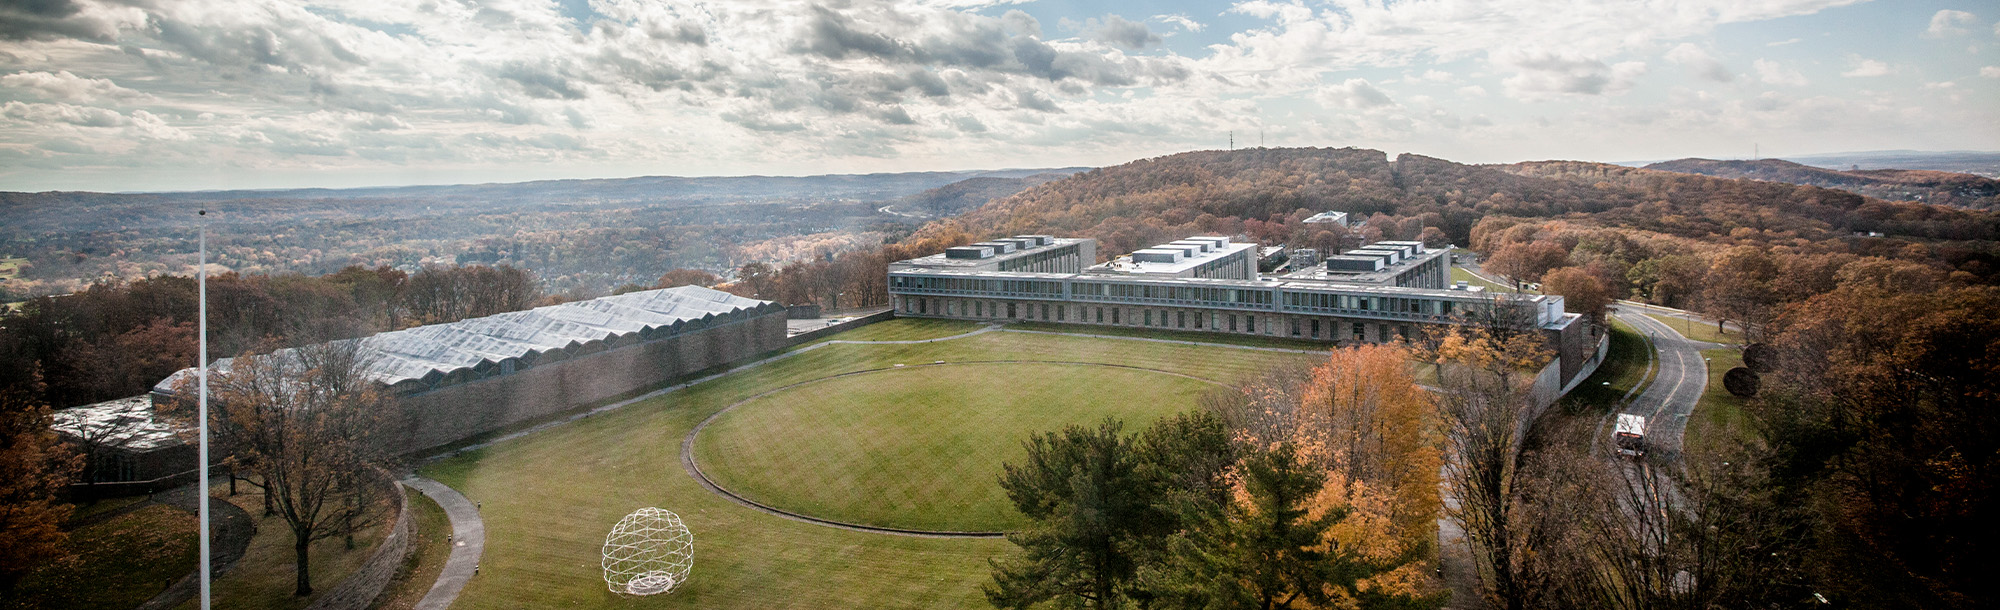 Aerial view of Mountaintop Campus